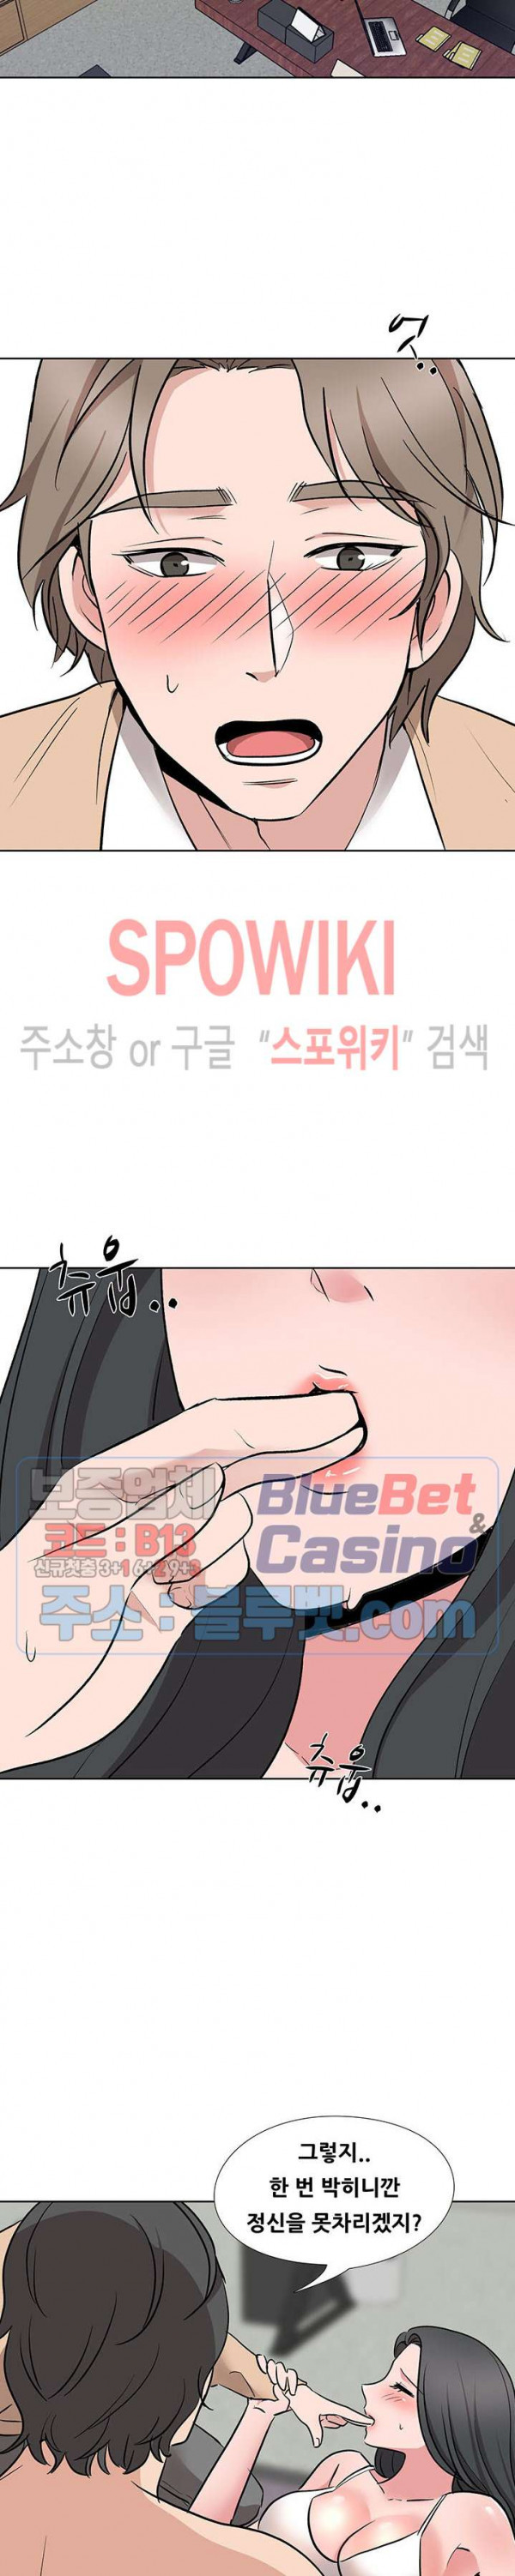 Casting Manhwa Raw - Chapter 14 Page 3